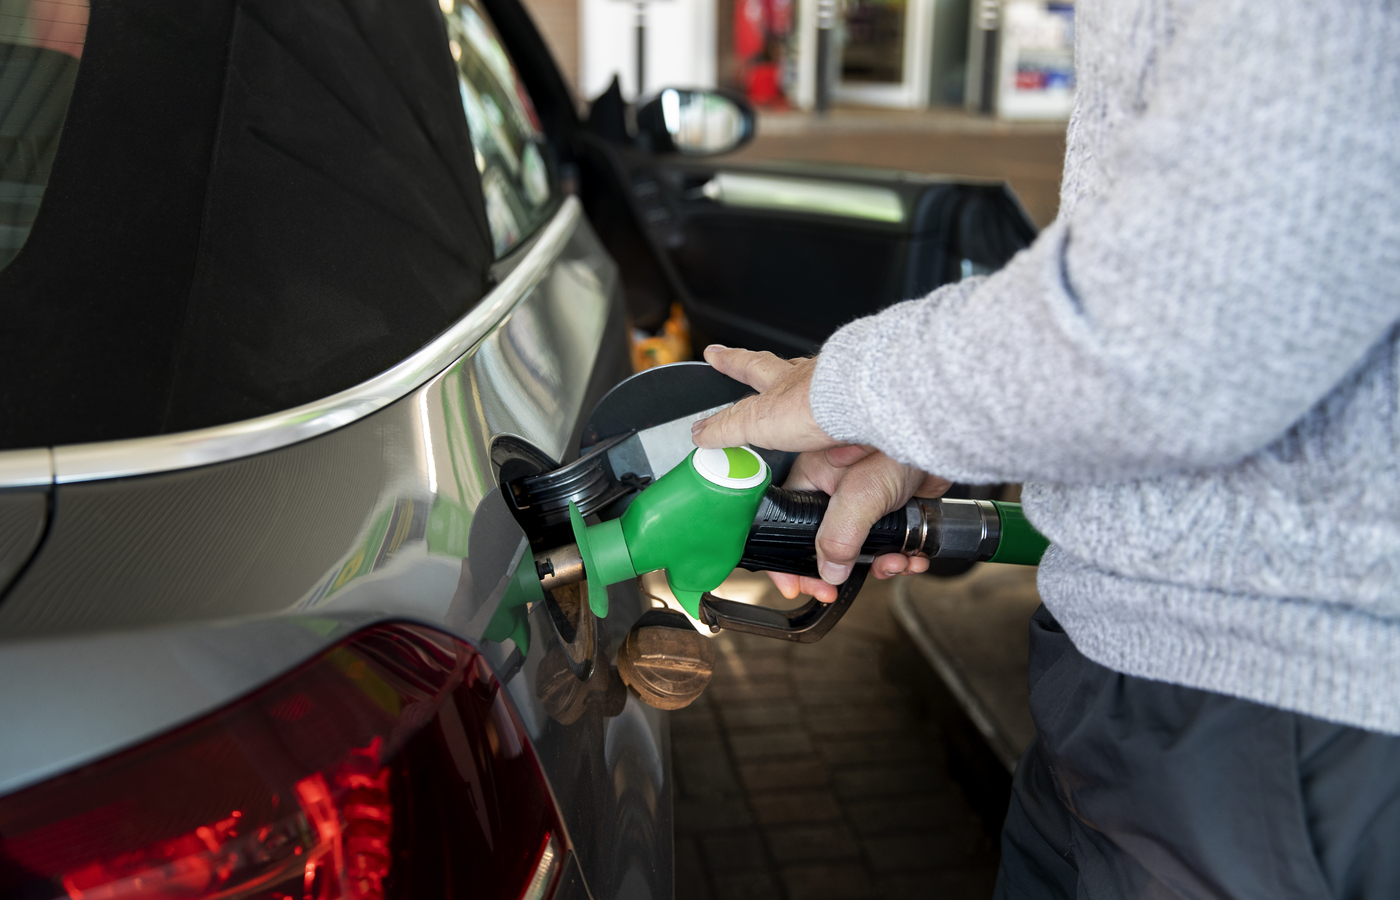 Fuel prices are a barrier for Brazilians to buy vehicles, according to research